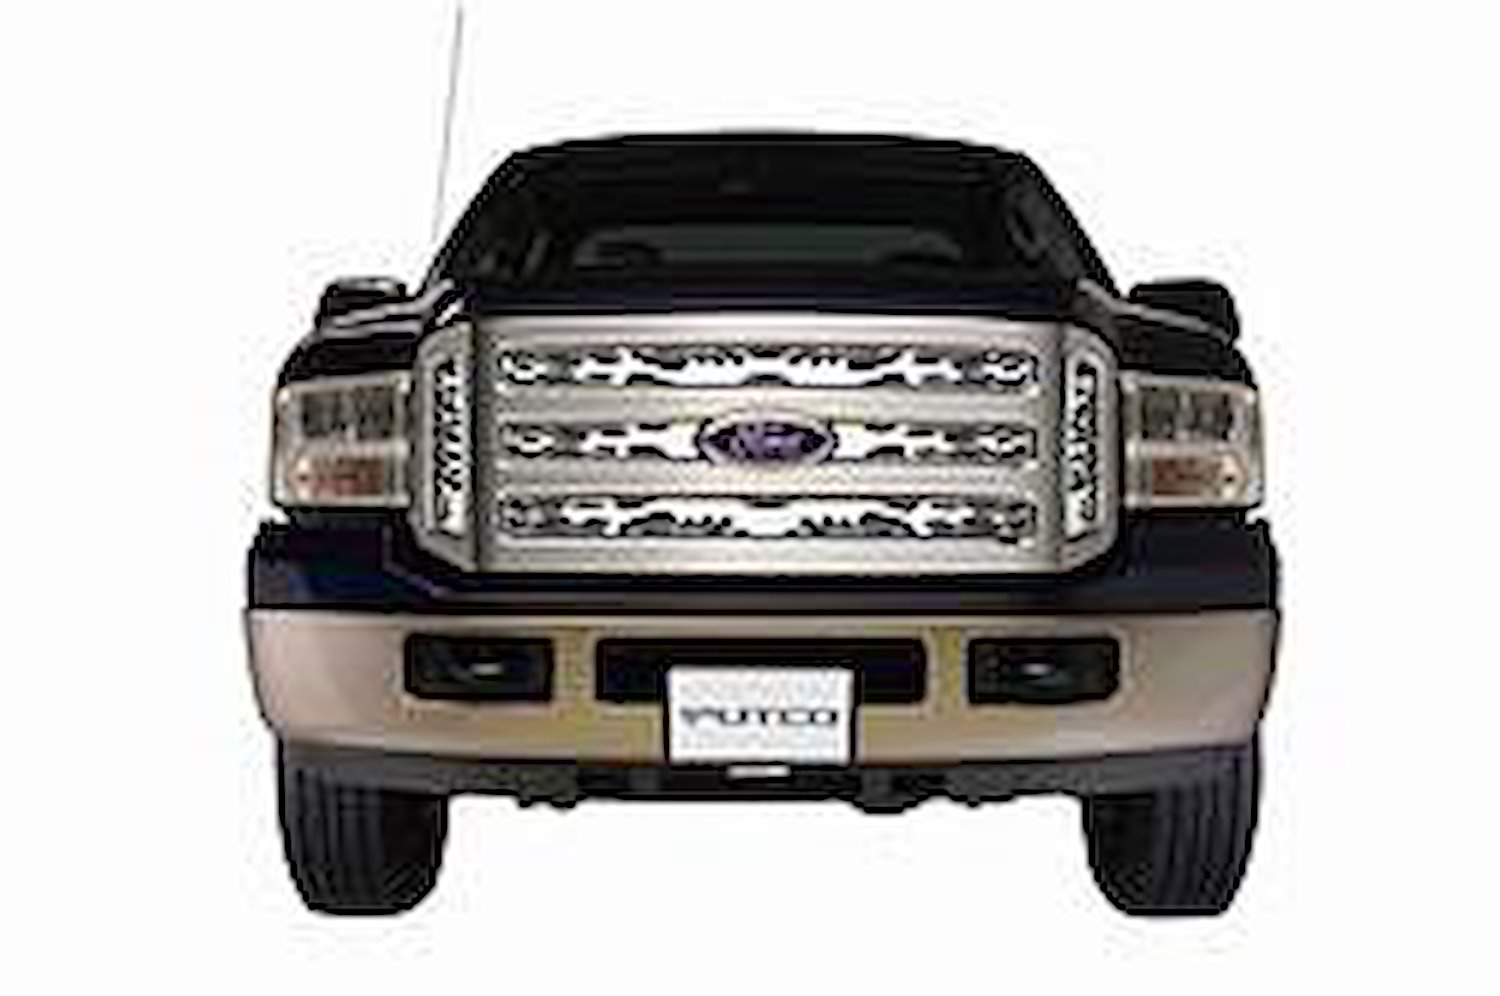 Ford Super Duty - Including Side Vents